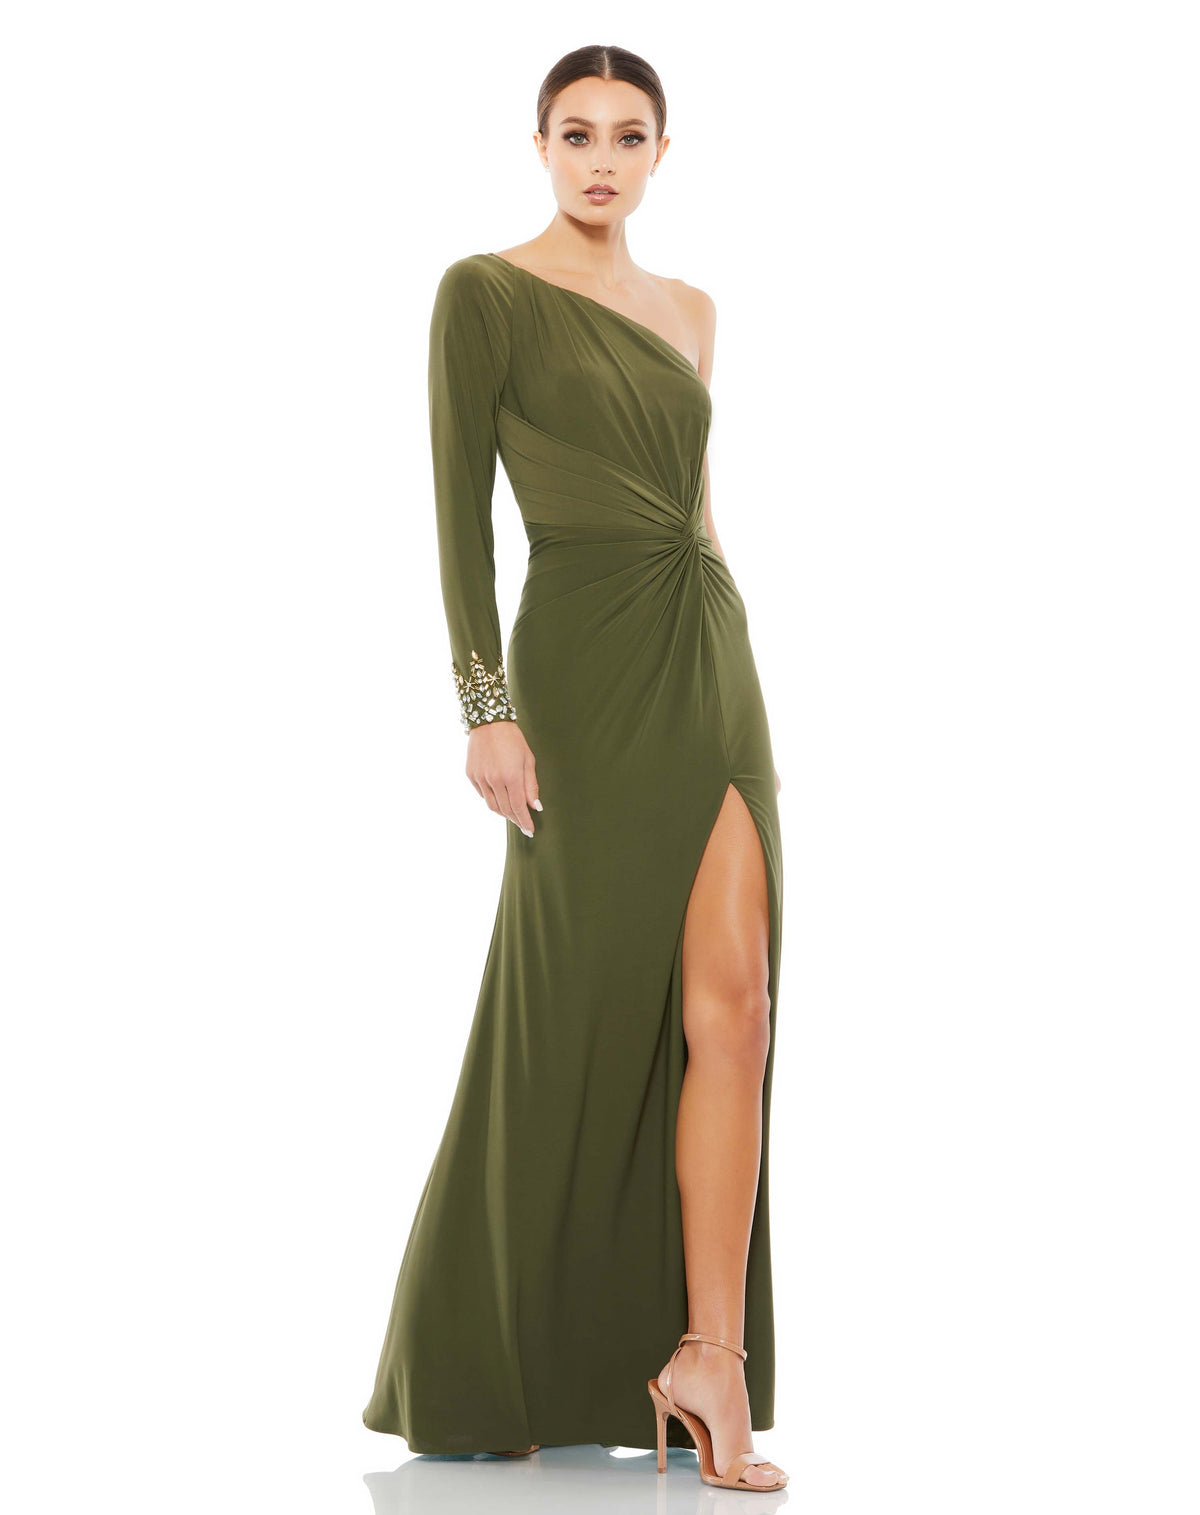 This stunning Mac Duggal elegant, olive, asymmetric evening dress, crafted from smooth jersey fabric, the floor-grazing dress is textured with pleats, an off-center waist twist, and starburst beads and glittering rhinestones at the edge of the single sleeve. A high slit underscores the gown’s sexy and modern styling. It’s perfect for a special-occasions proms and weddings!